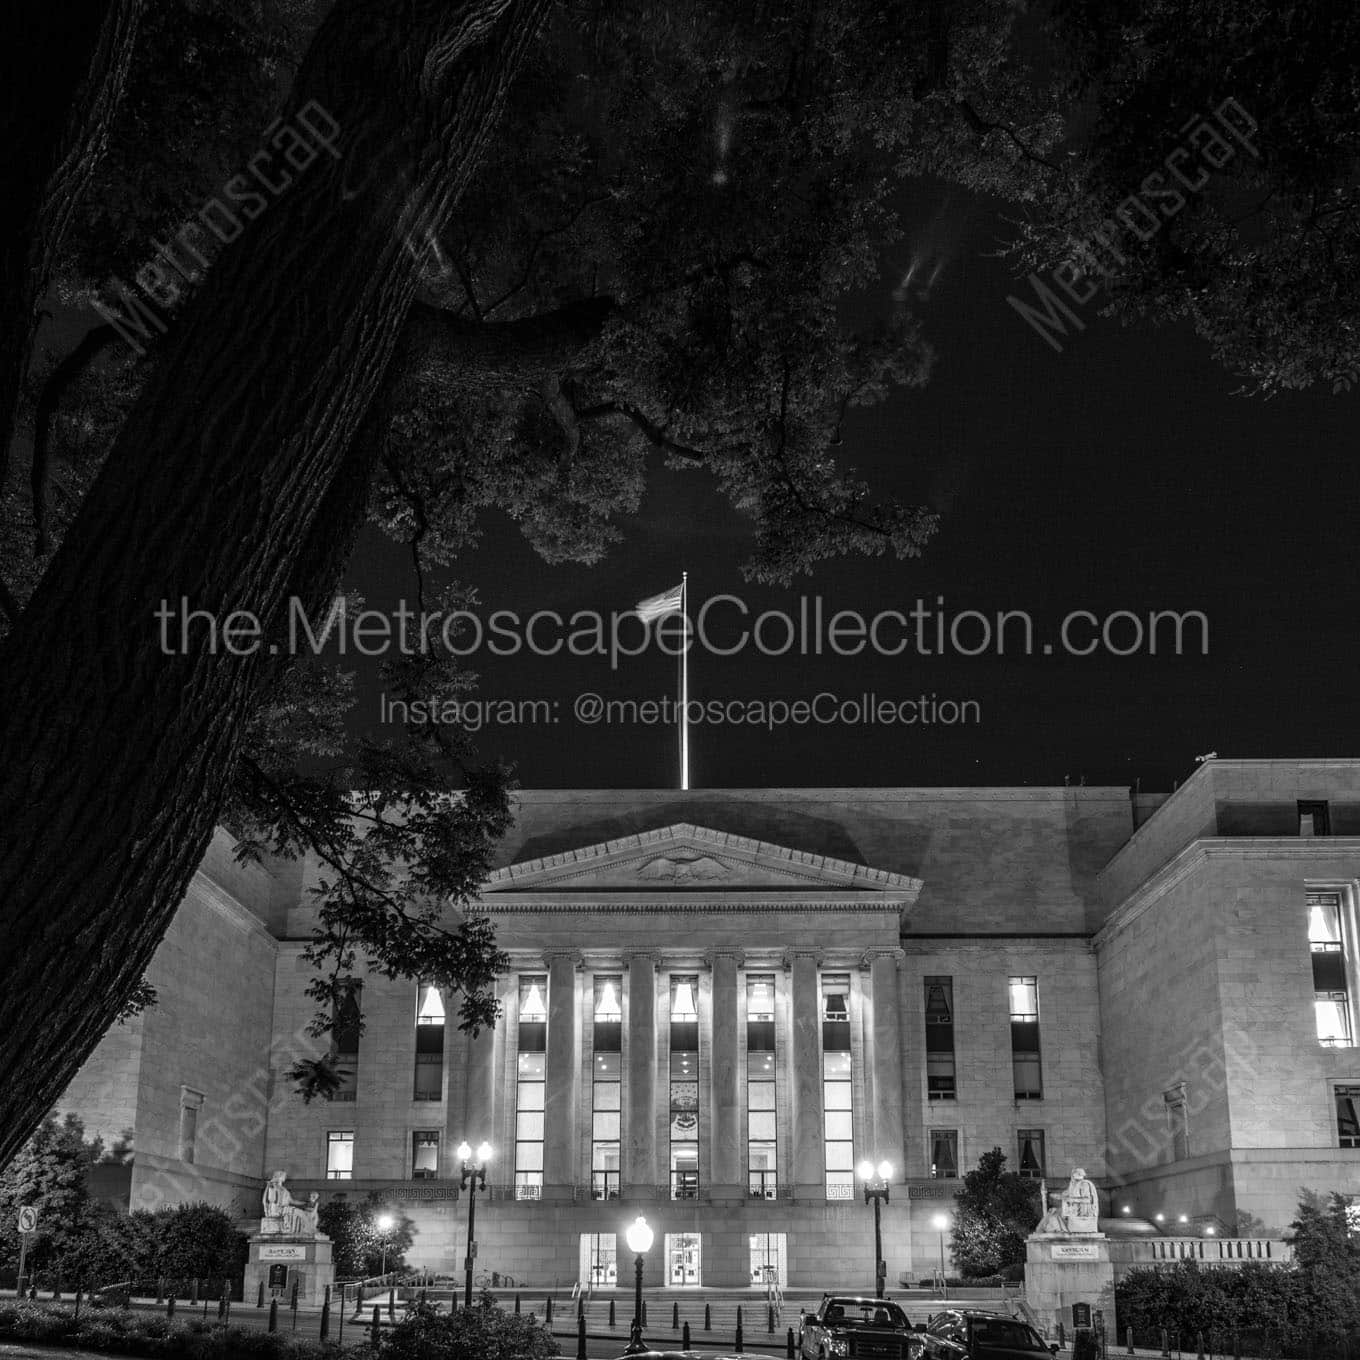 rayburn office building at night Black & White Office Art